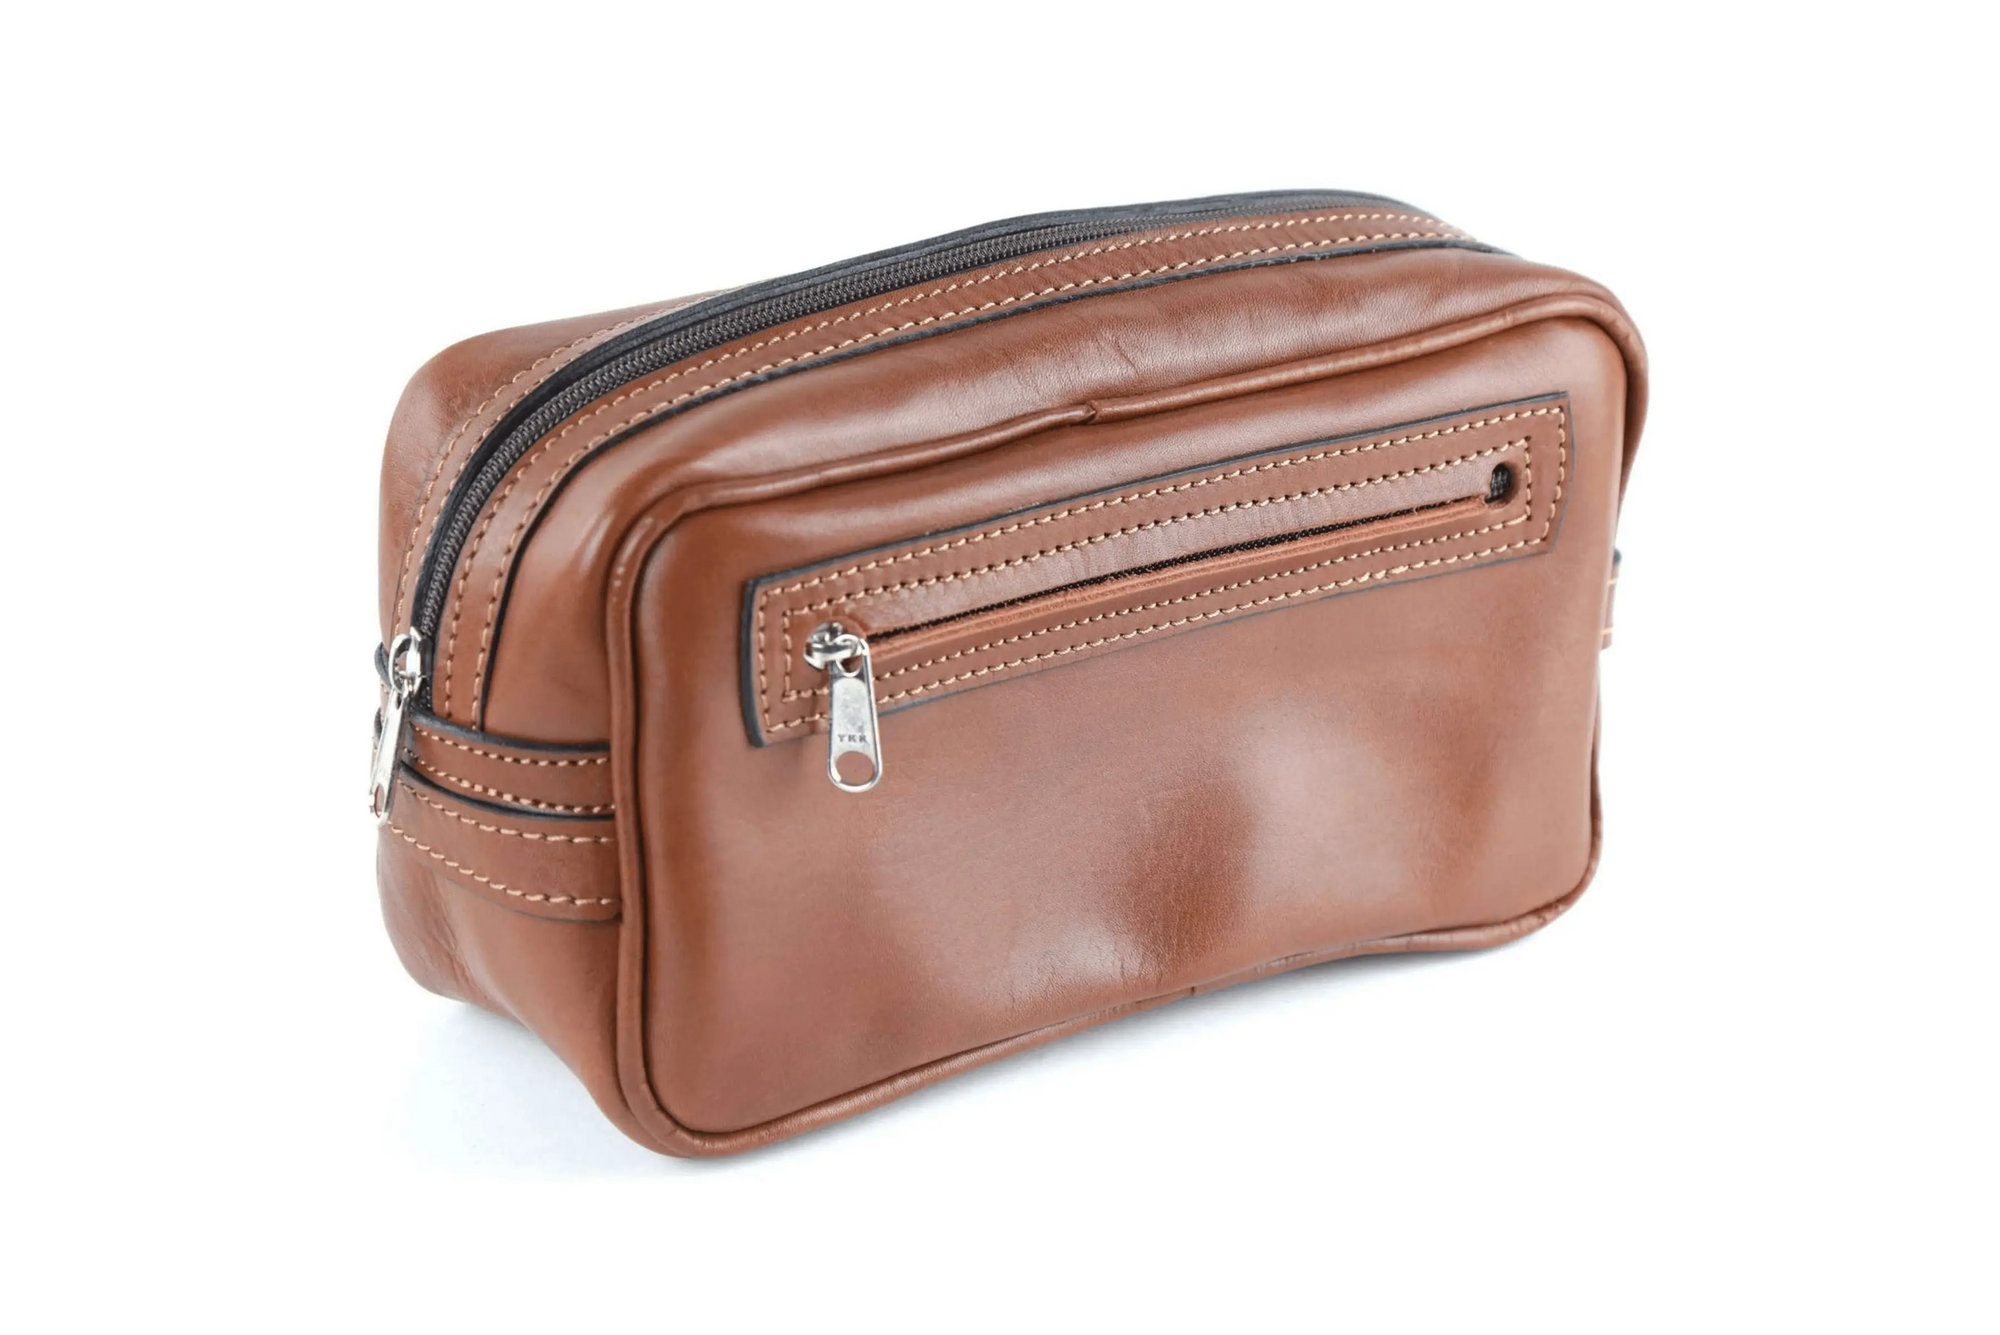 Pouch bag with genuine brown leather